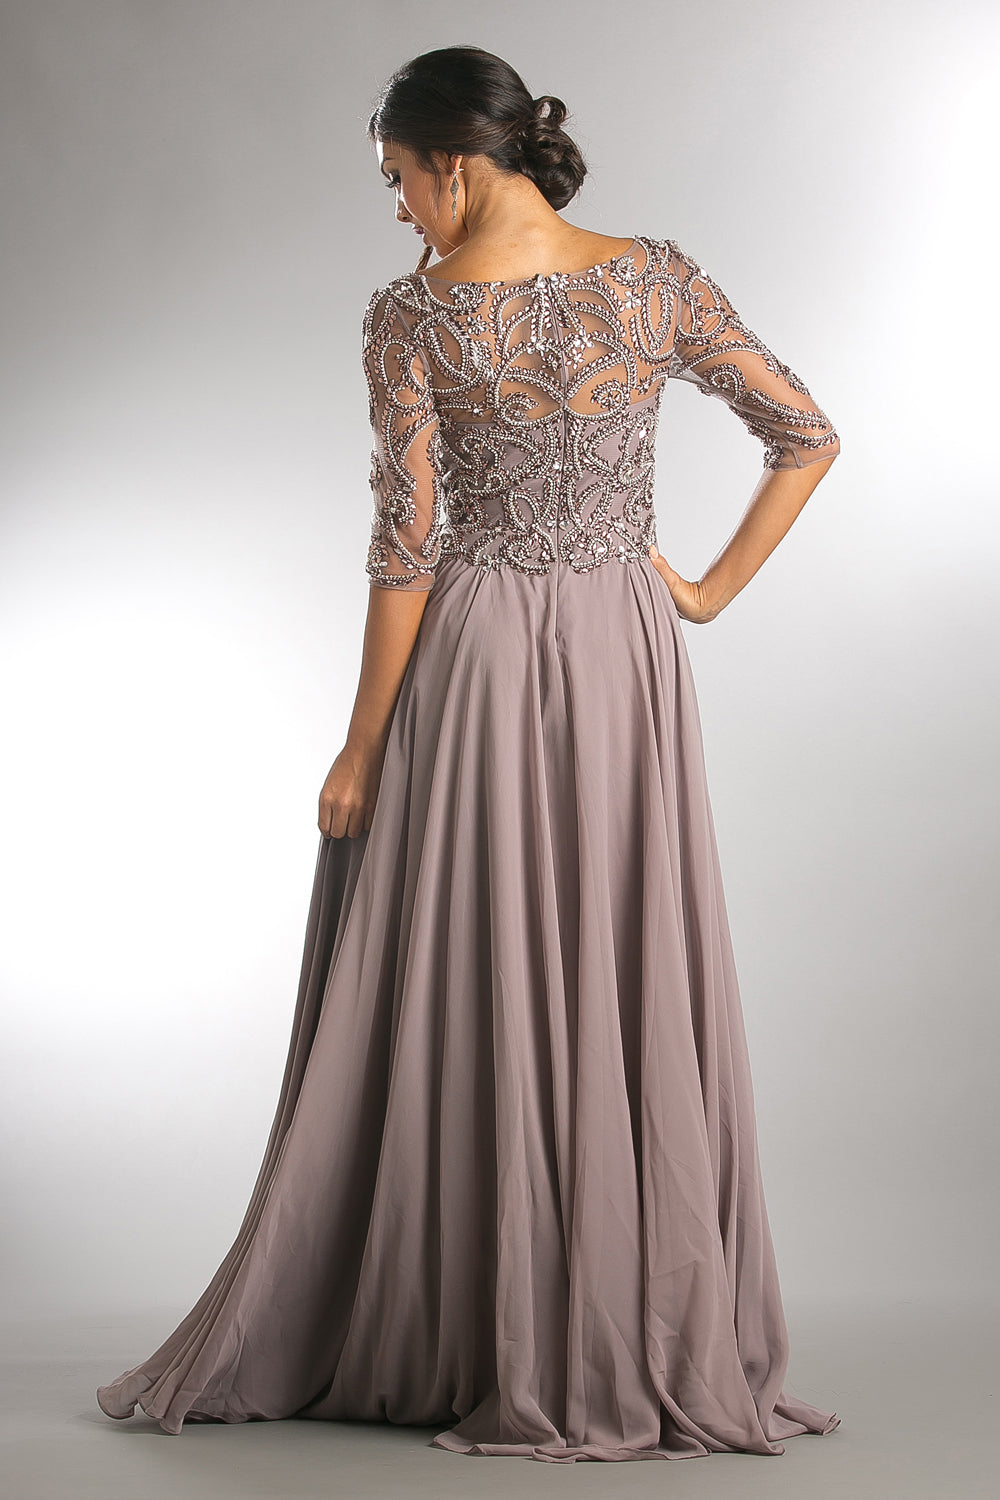 Beaded 3/4 Sleeve V-Neck Chiffon Gown by Amelia Couture 7046